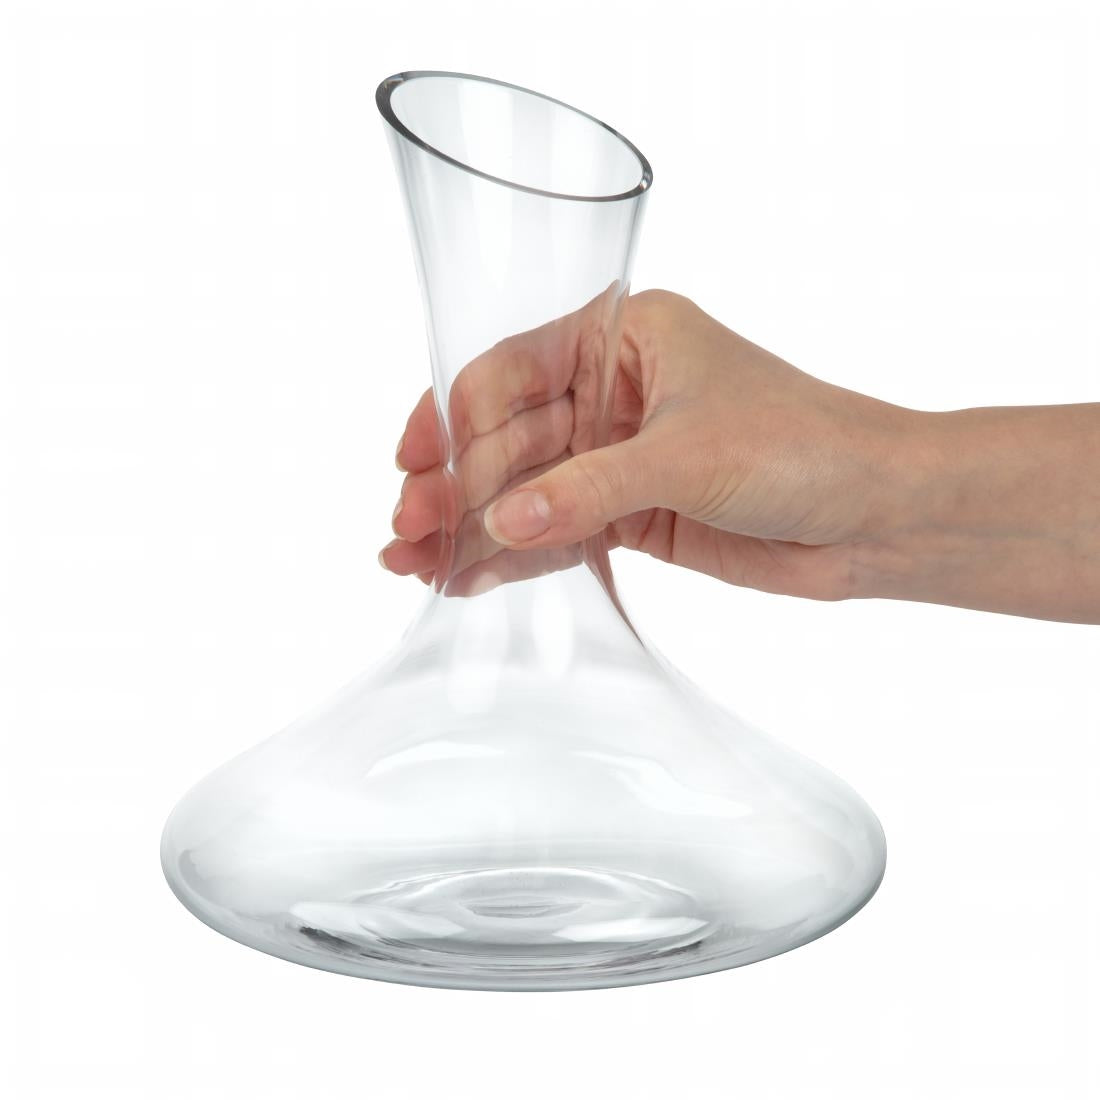 CN609 Olympia Curved Glass Decanter 750ml